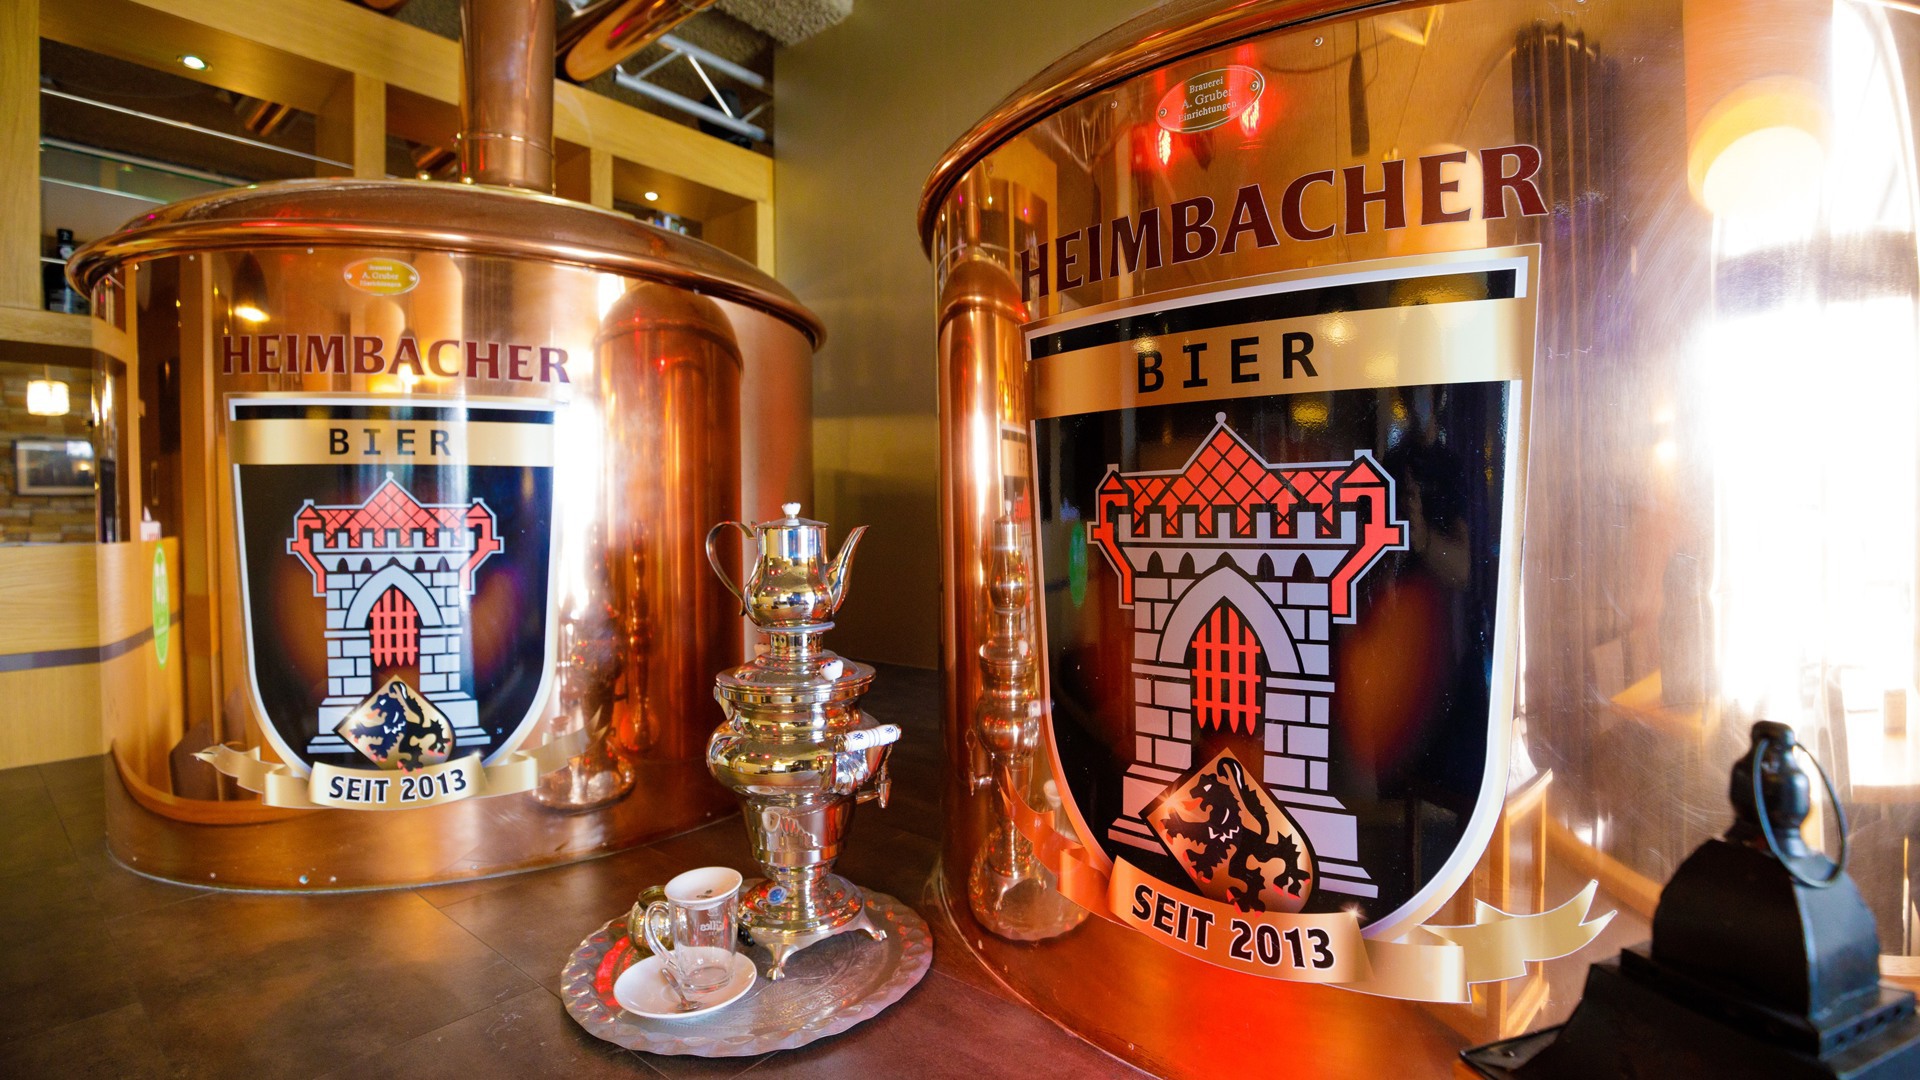 Sample the locally brewed Heimbacher beer